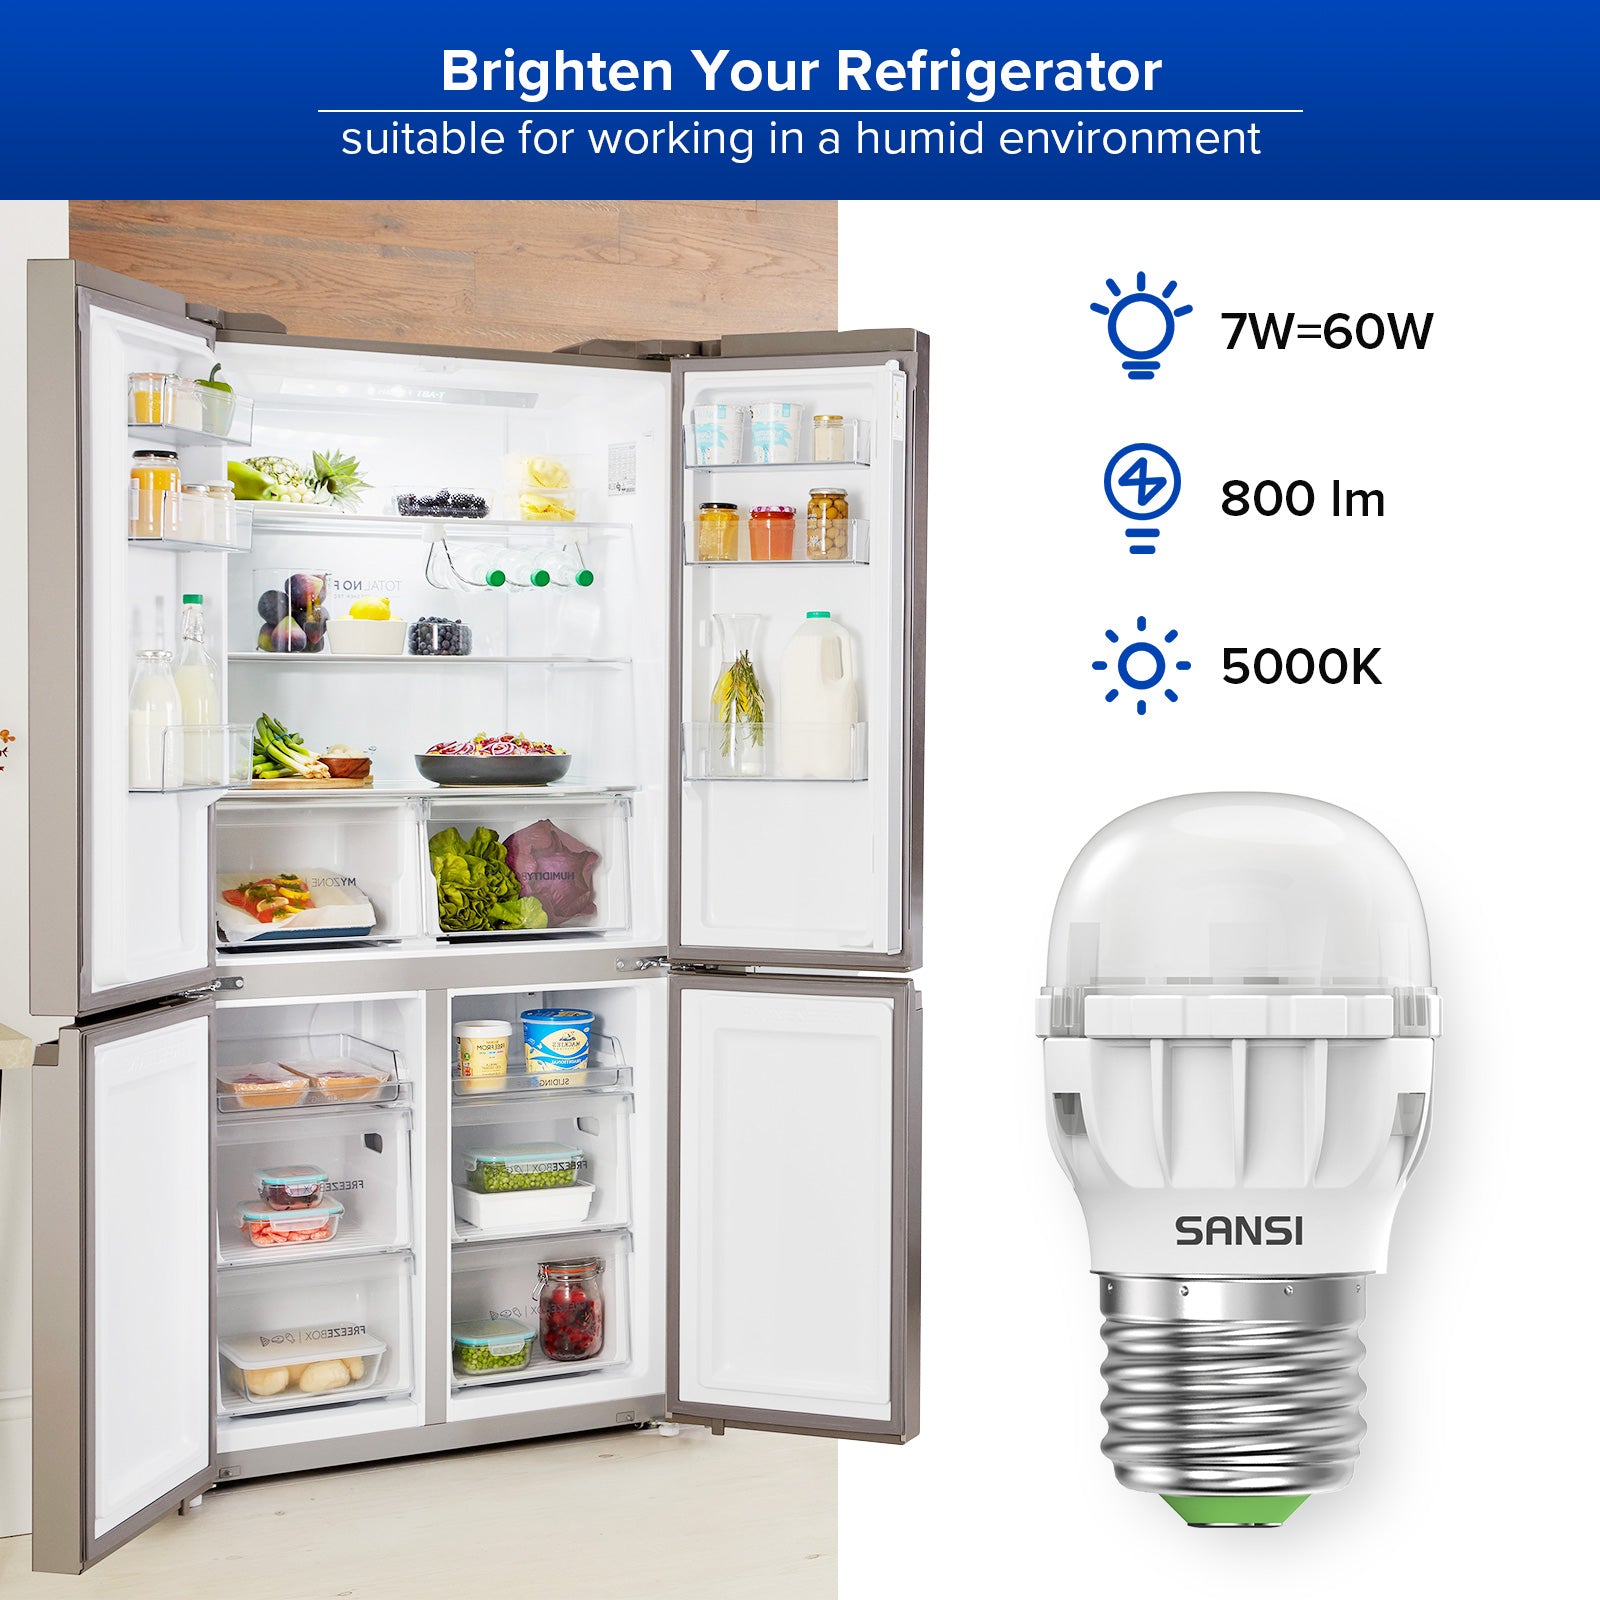 A11 7W LED Light Bulb (6 Pack),brighten your refrigerator,suitable for working in a humid environment.